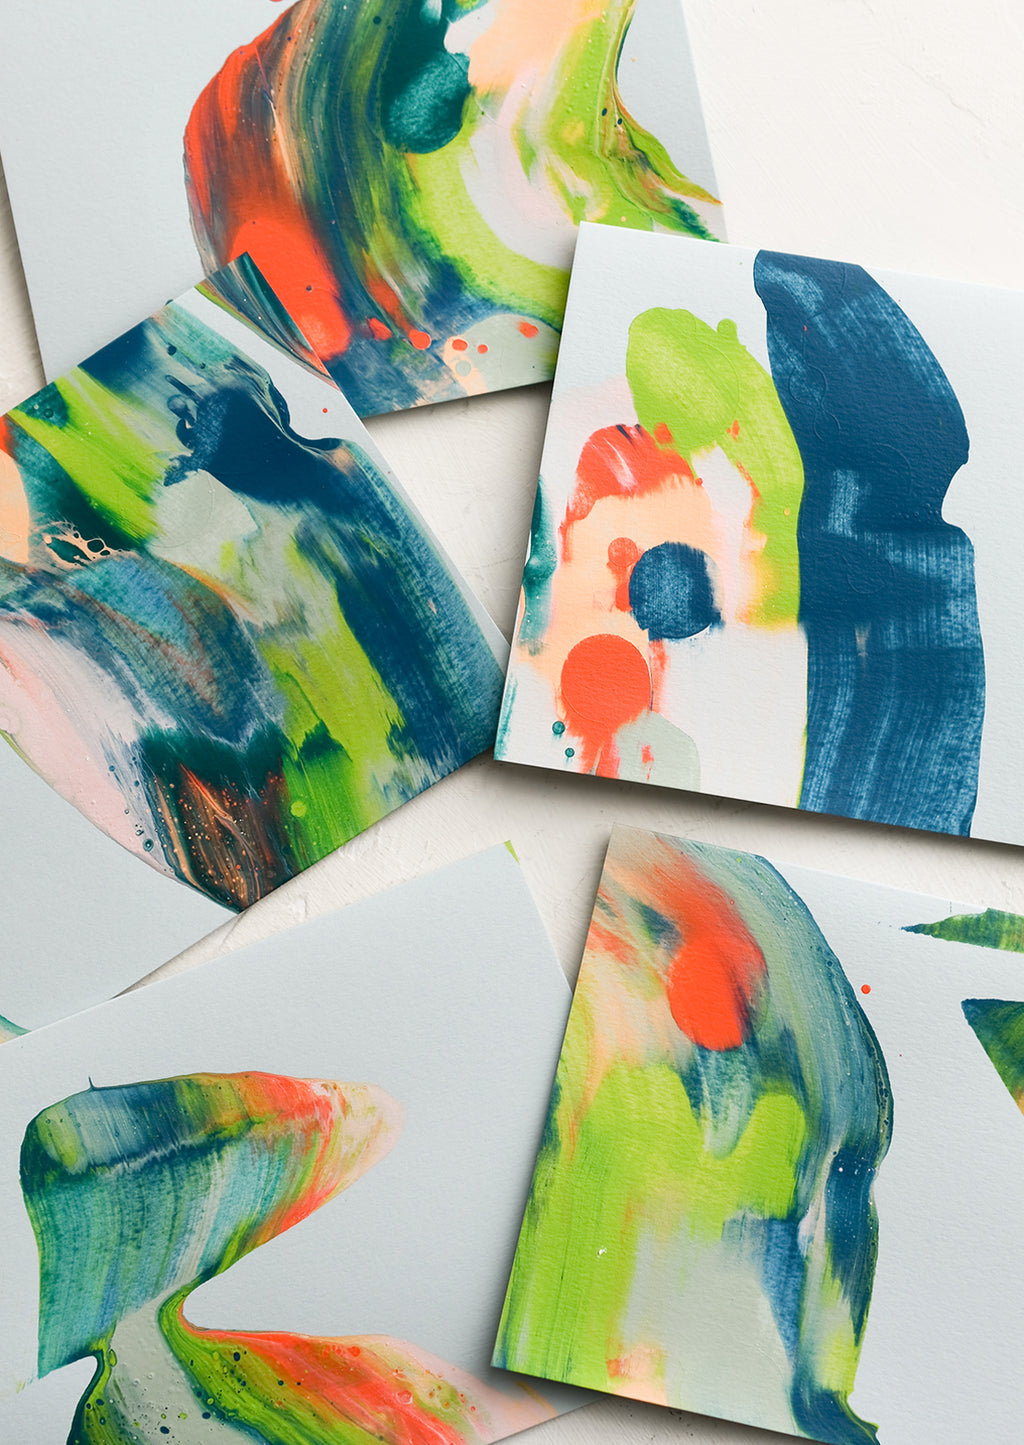 1: Paintswirl cards in shades of blue, coral and green.